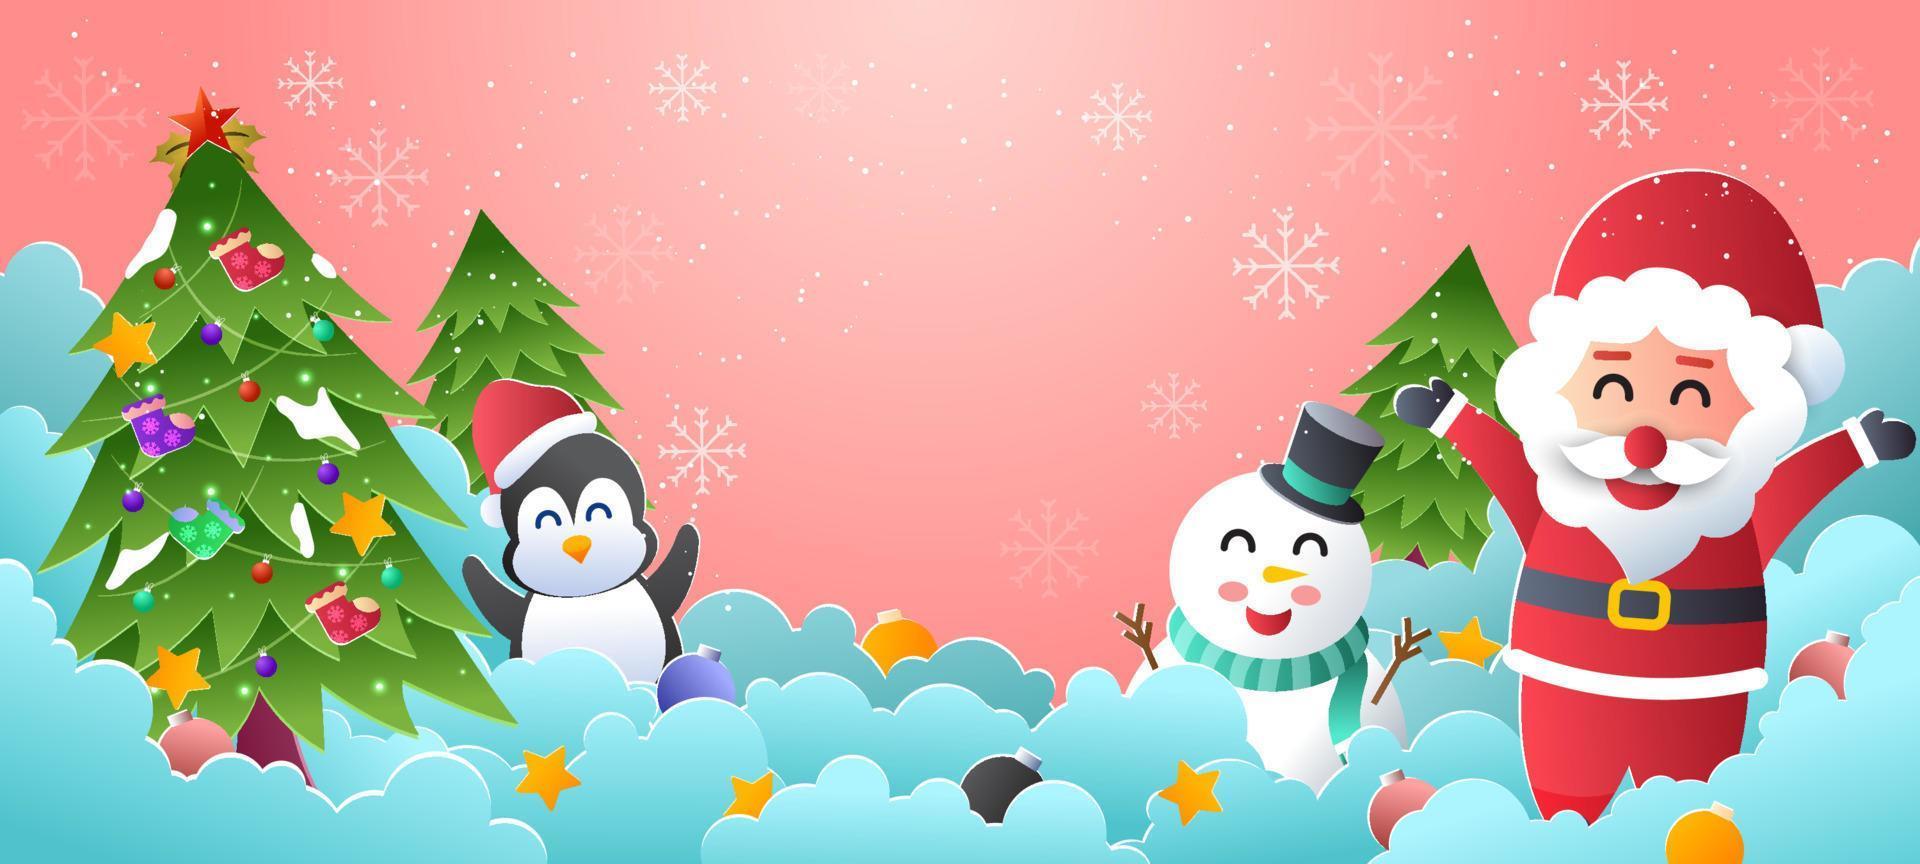 Merry Christmas Paper Background vector